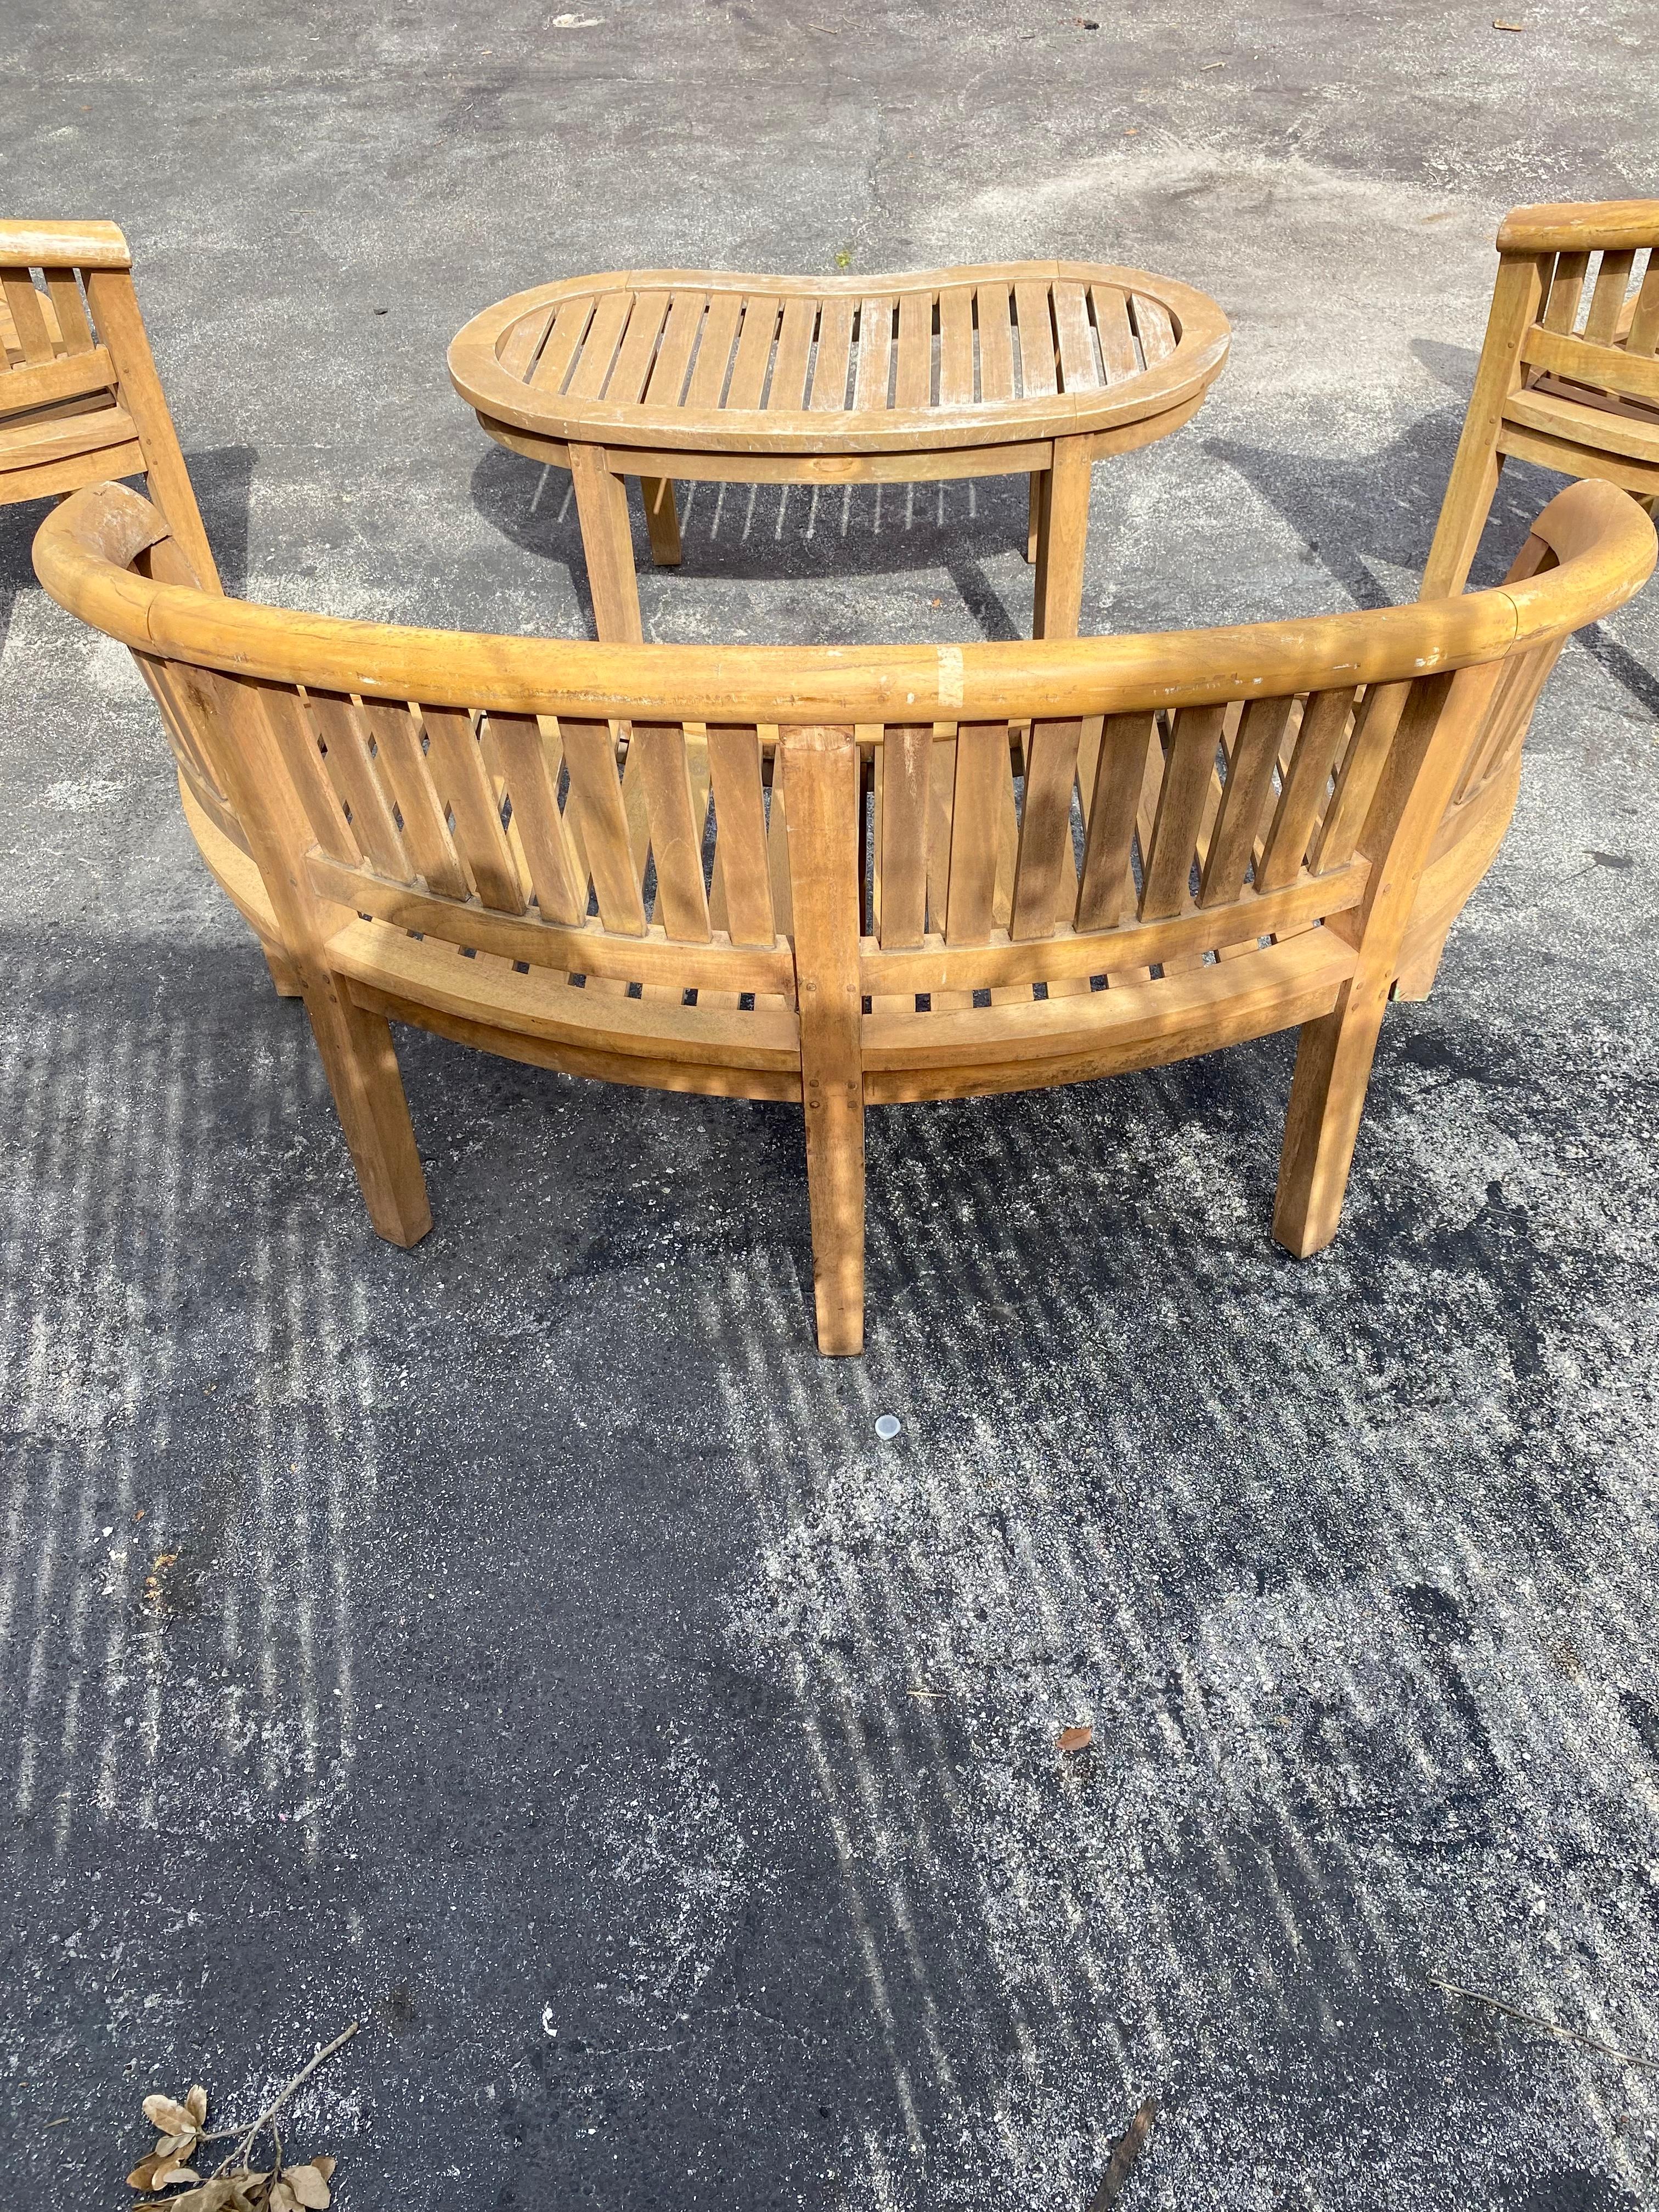 1970s Teak Curved Barrel Kidney Slatted Settee Table Chairs, Set of 4 For Sale 7